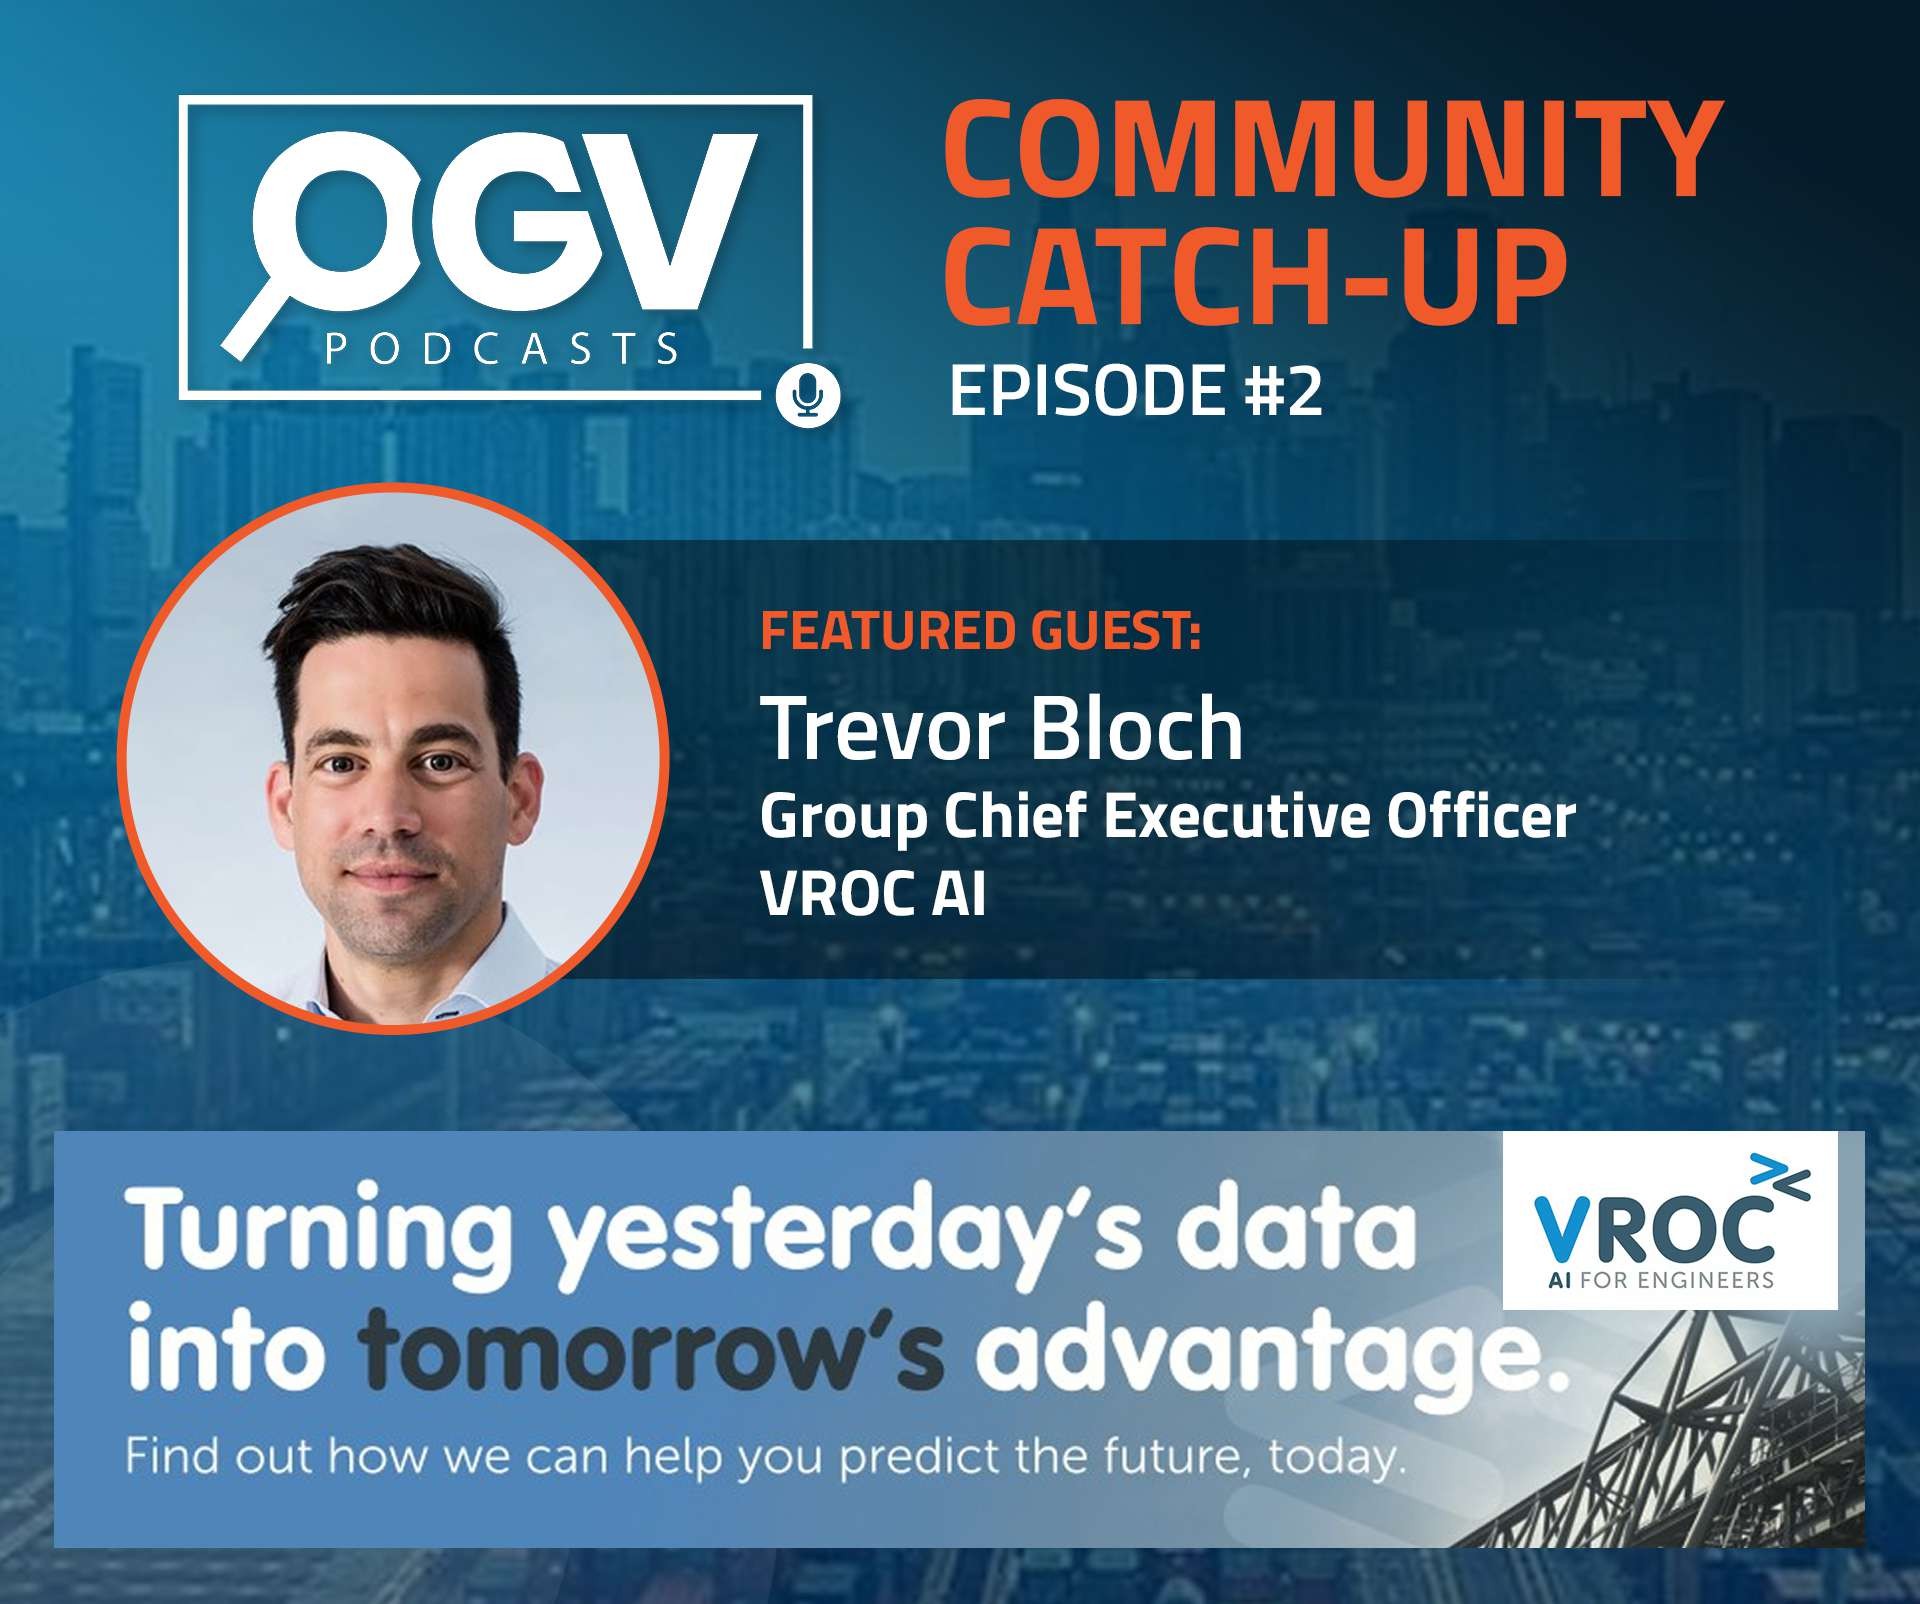 OGV Community Catch-up with Trevor Bloch from VROC AI